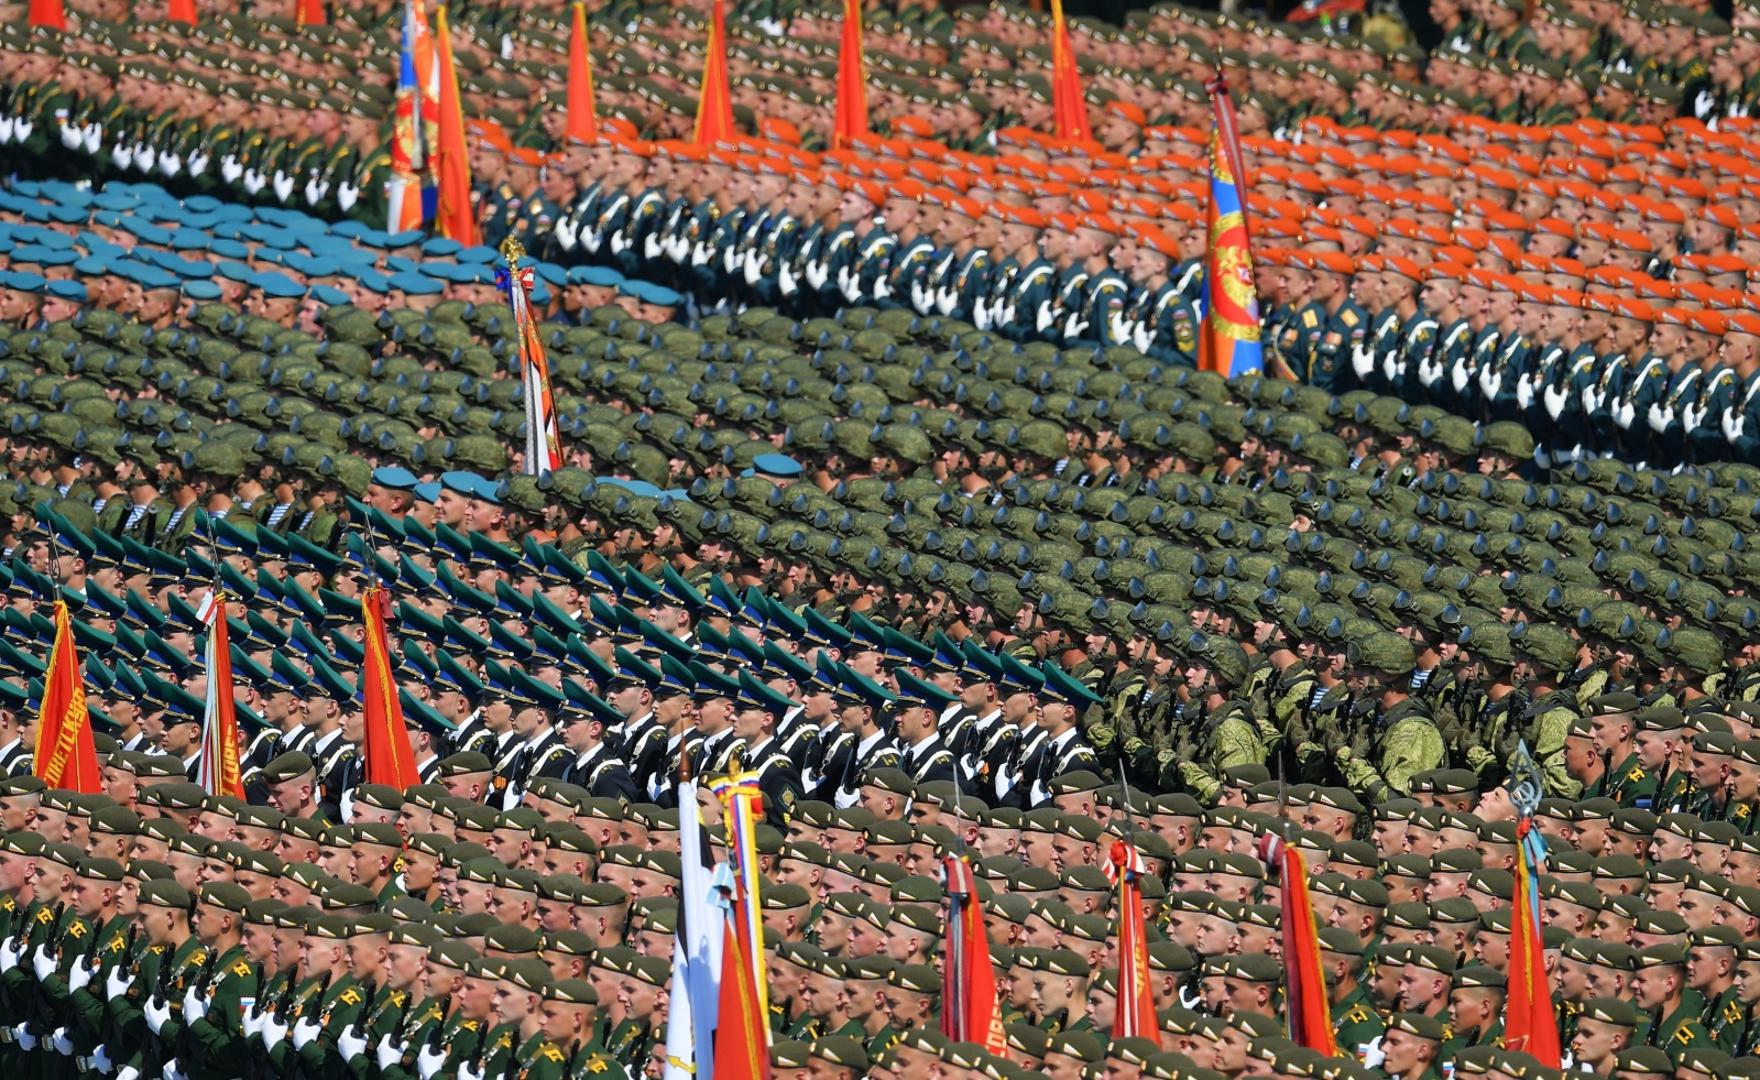 Victory Day Parade in Moscow Servicemen attend the Victory Day Parade in Red Square in Moscow, Russia, June 24, 2020. The military parade, marking the 75th anniversary of the victory over Nazi Germany in World War Two, was scheduled for May 9 but postponed due to the outbreak of the coronavirus disease (COVID-19). Host photo agency/Vladimir Pesnya via REUTERS Host photo agency